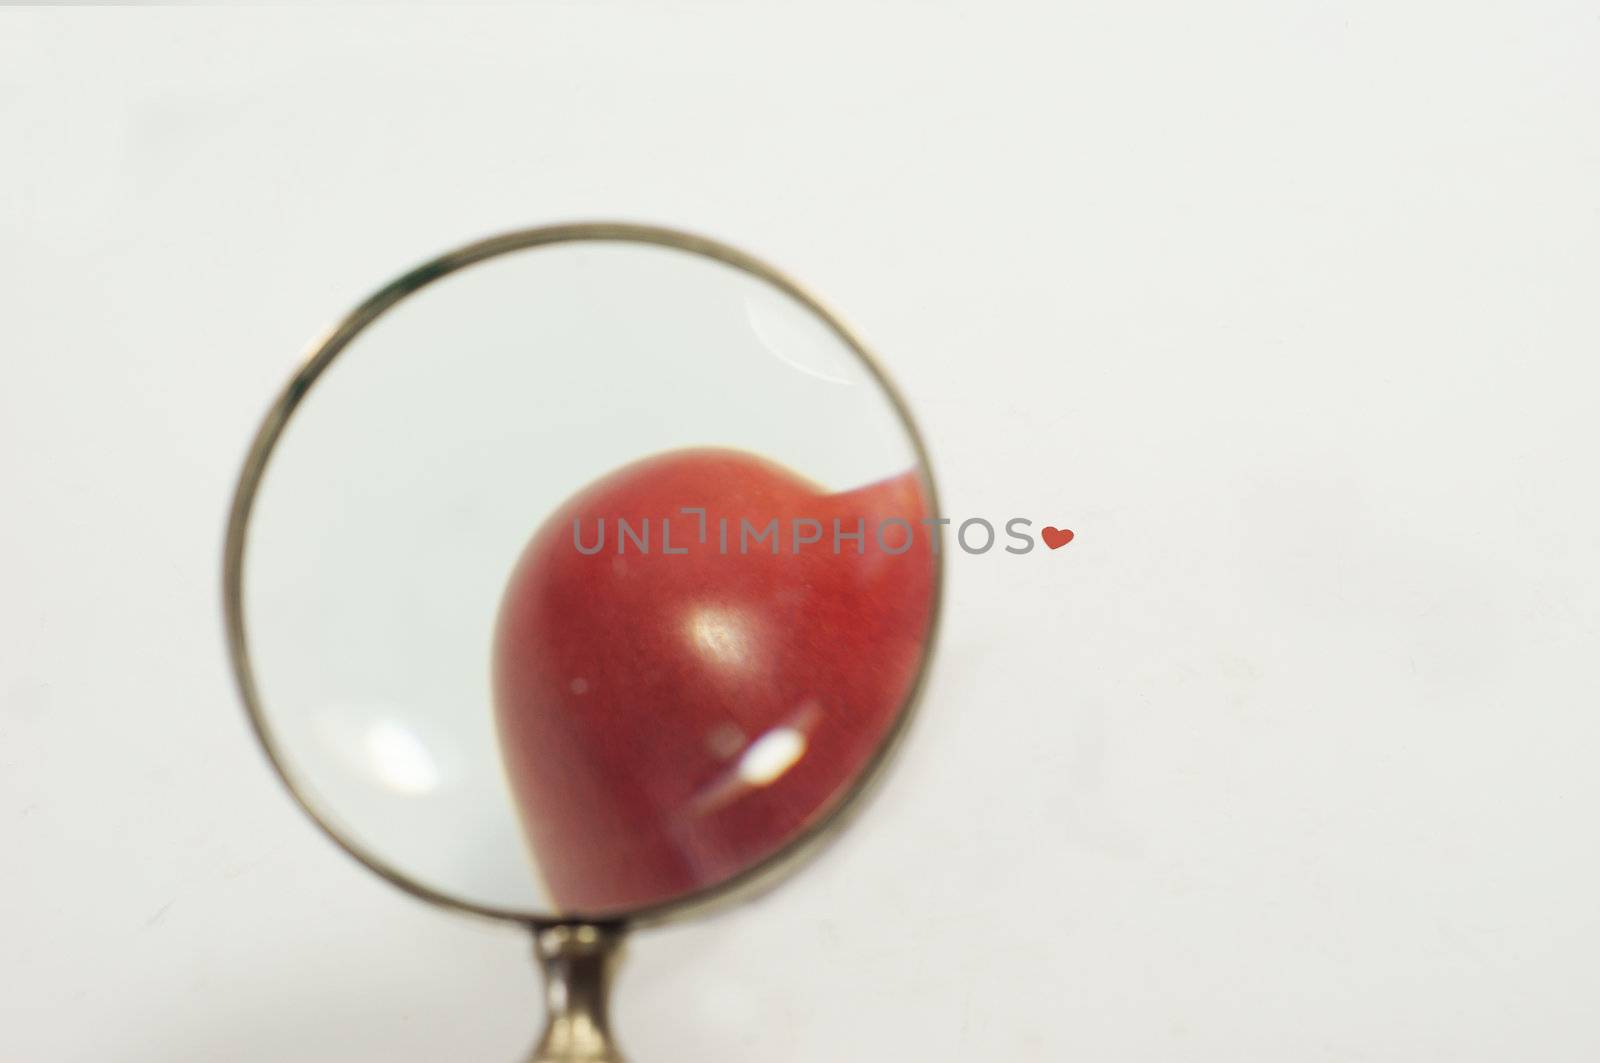 A retro magnifier is magnifying a little heart